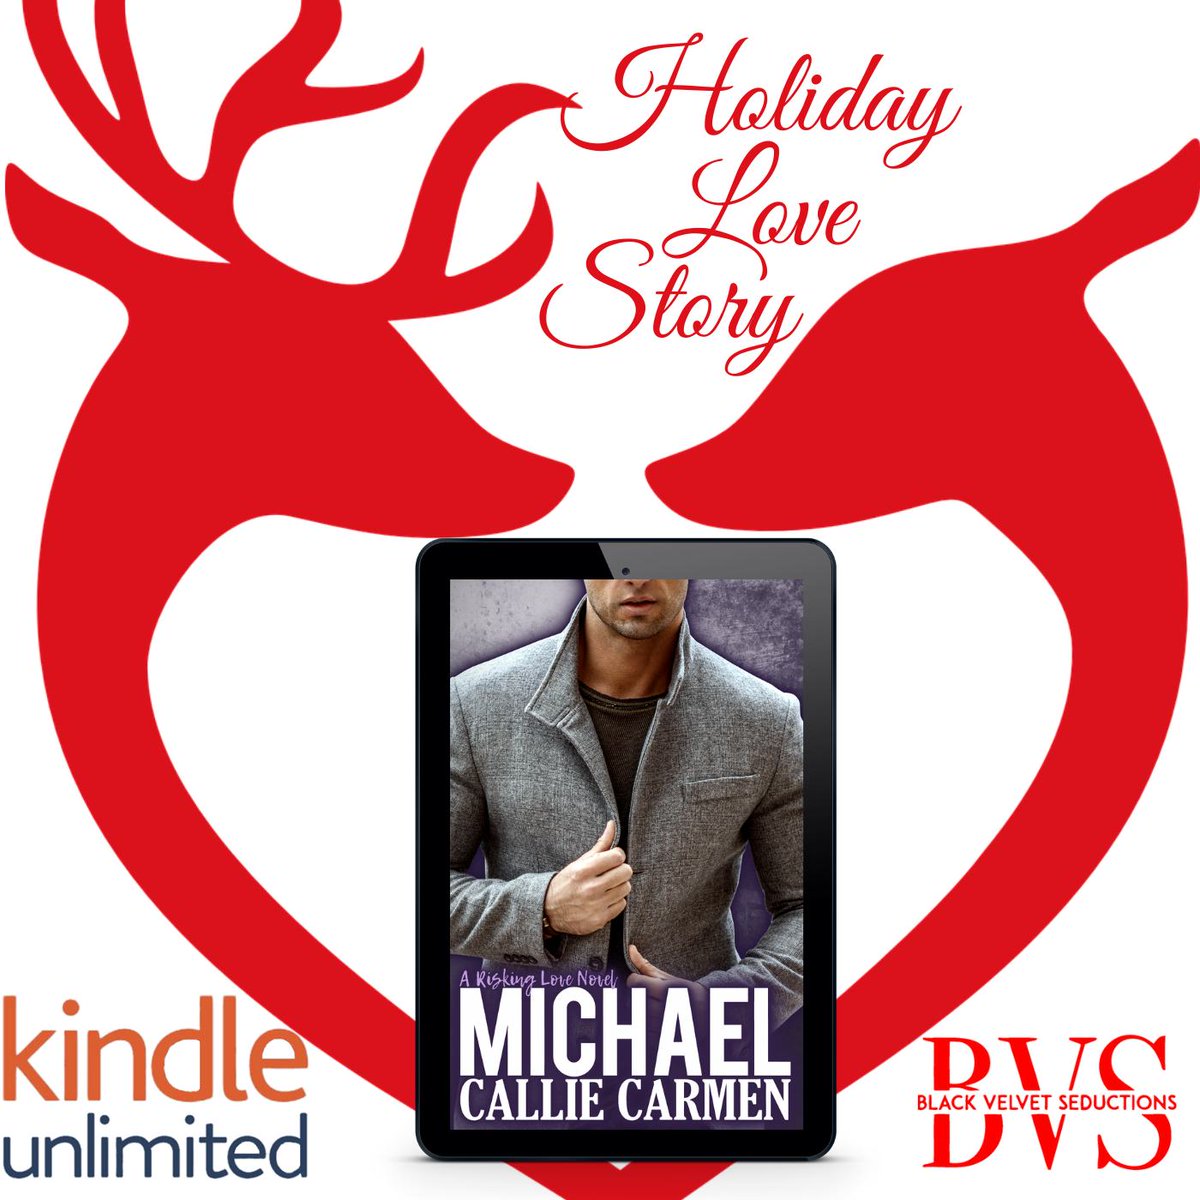 Michael is a five-star love triangle thriller romance. It will keep you on the edge of your seat.
amzn.to/3dczvUt
Based on a true story!
#Romance #thriller #Suspense #LoveStory  #RomanticSuspense #MondayMood #christmasromance #RomanceReaders #holidayromance #Christmas2023